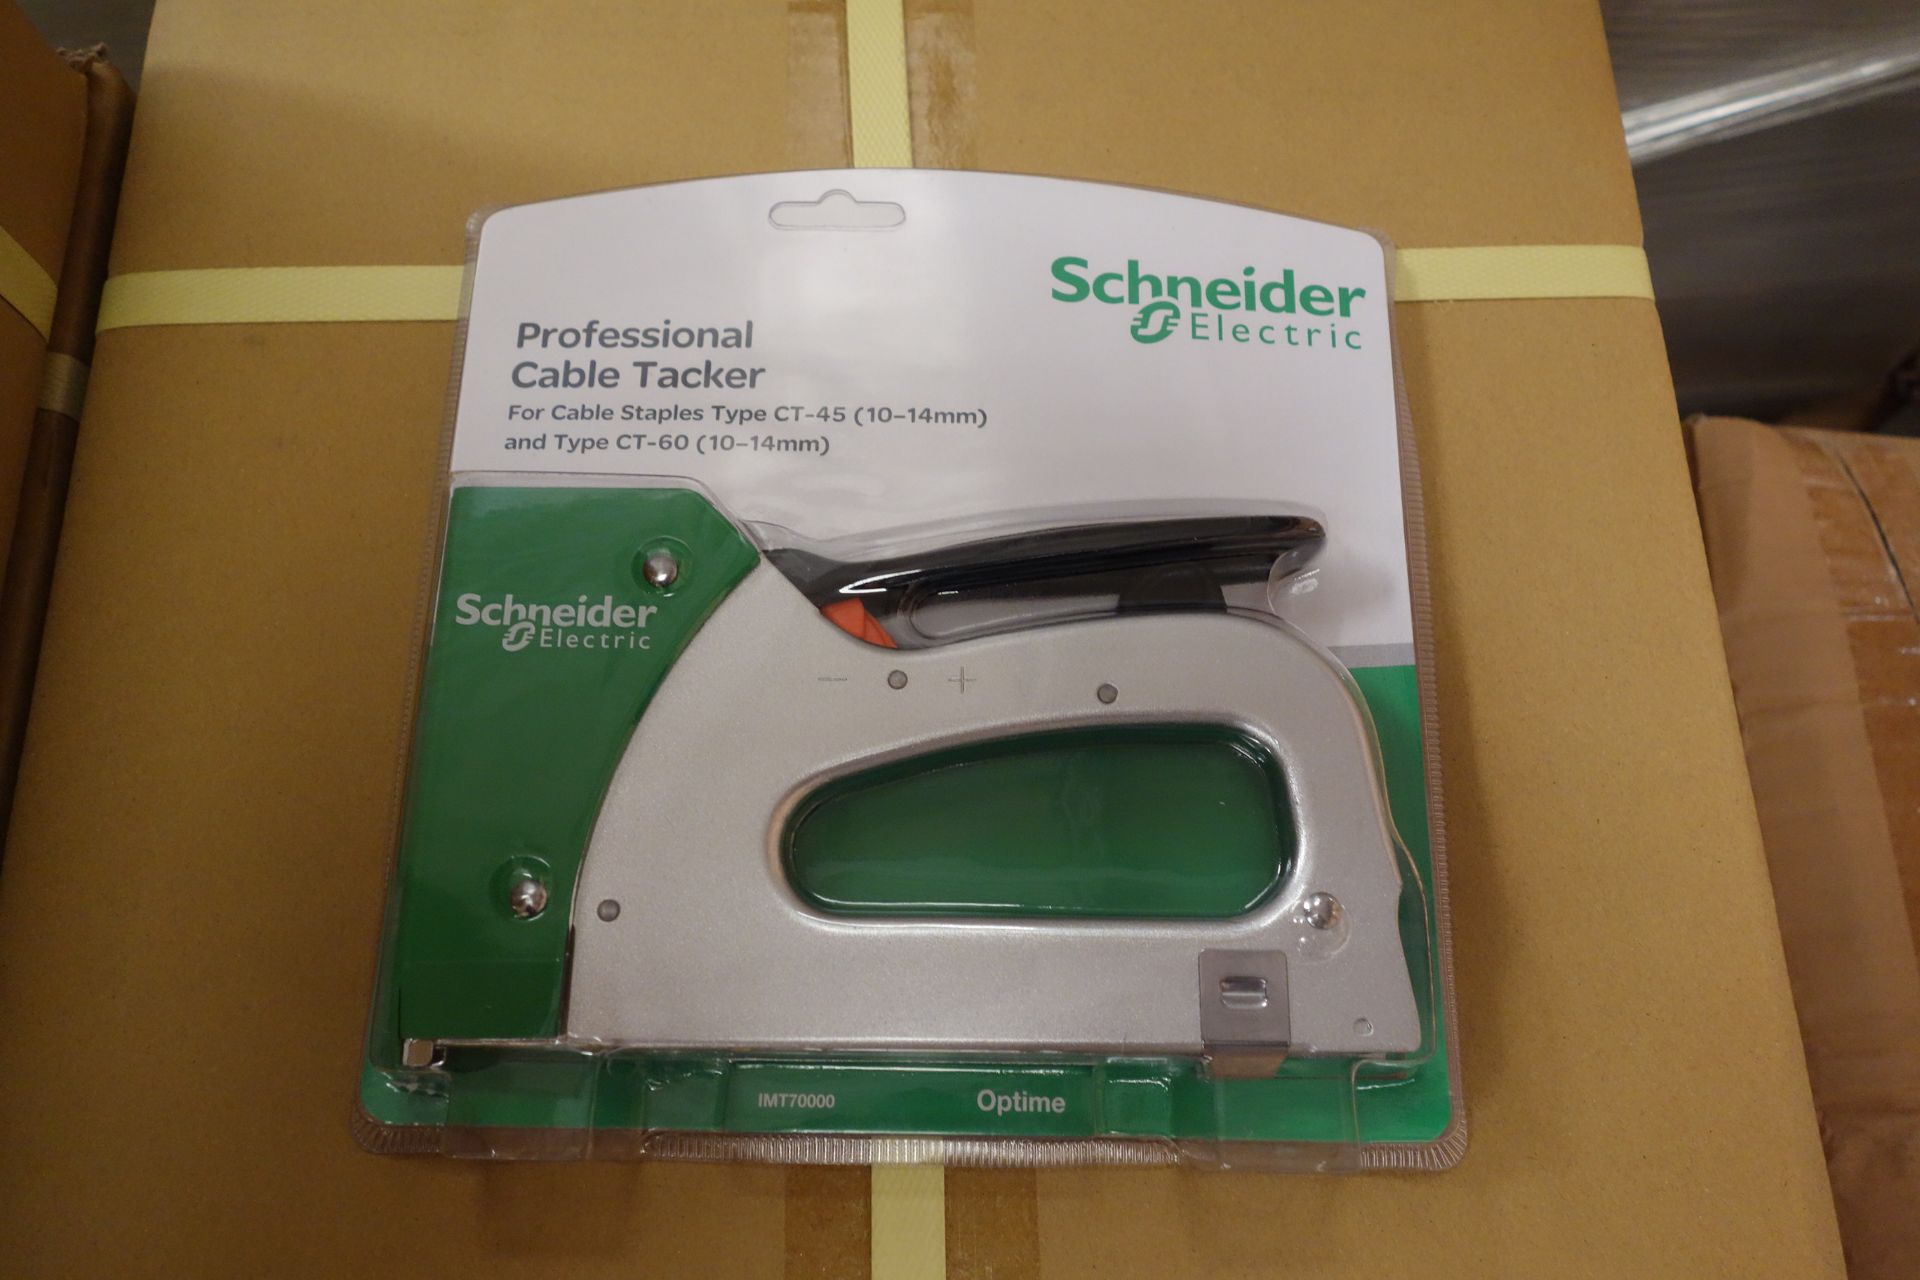 5 X Schneider IMT 7000 Professional Cable Trcker For Cable Staples Type CT-45 10-14MM + Type CT 60